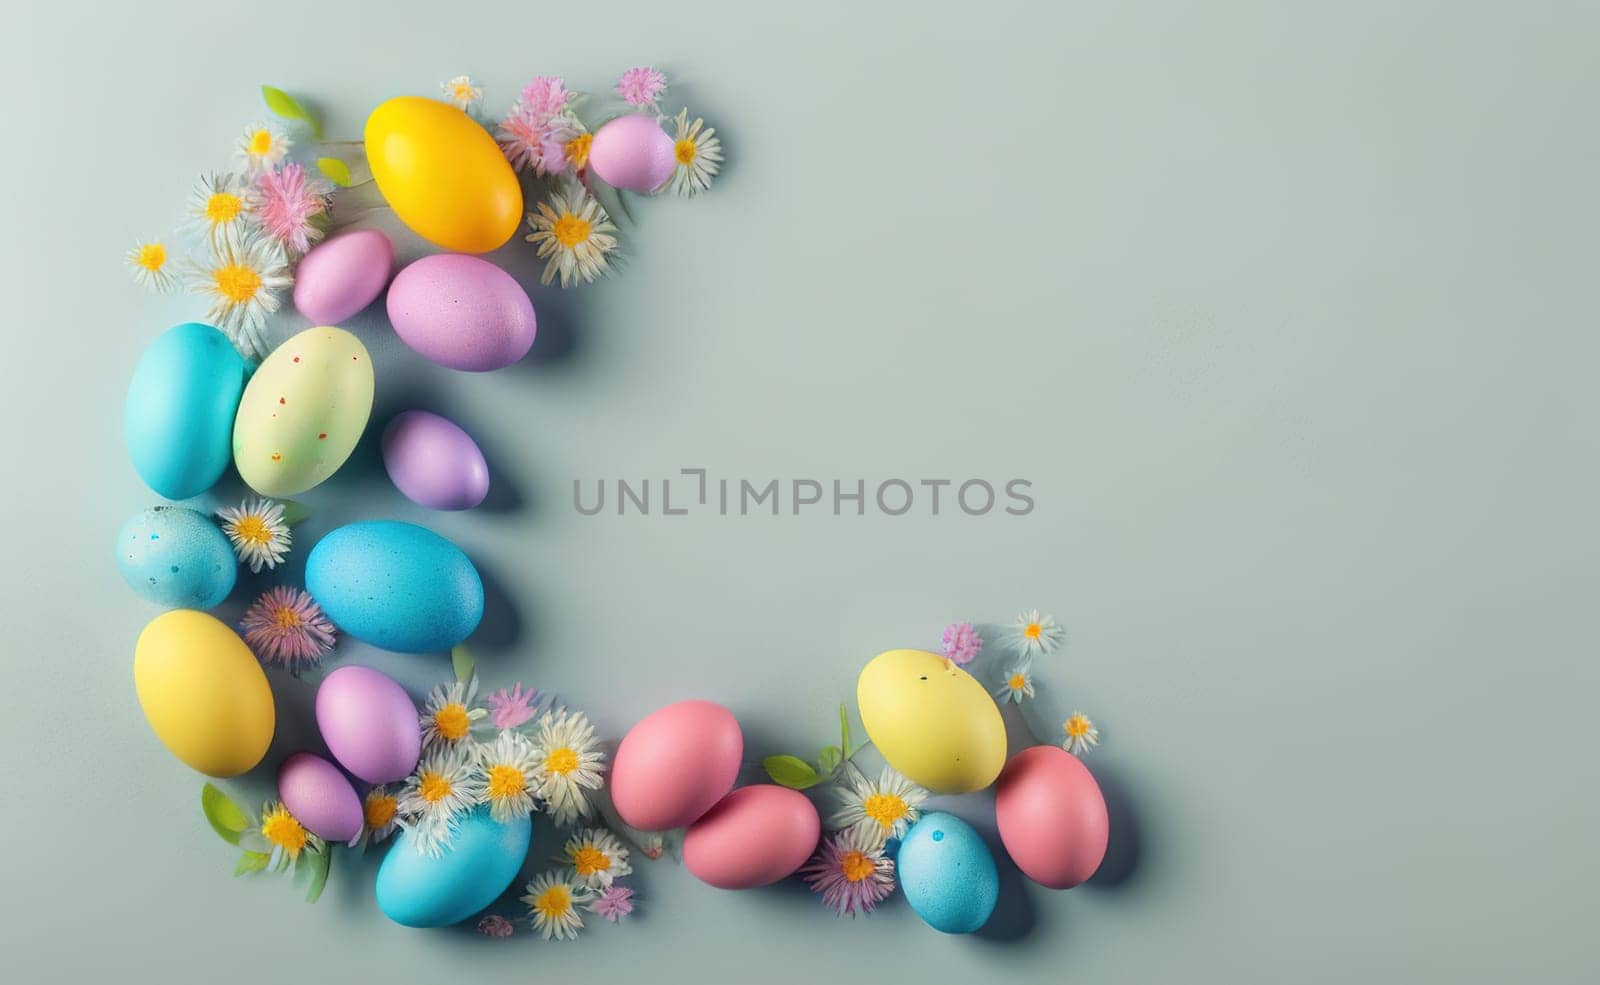 Minimalist, modern Easter background with flowers and Easter eggs in pastel by EkaterinaPereslavtseva